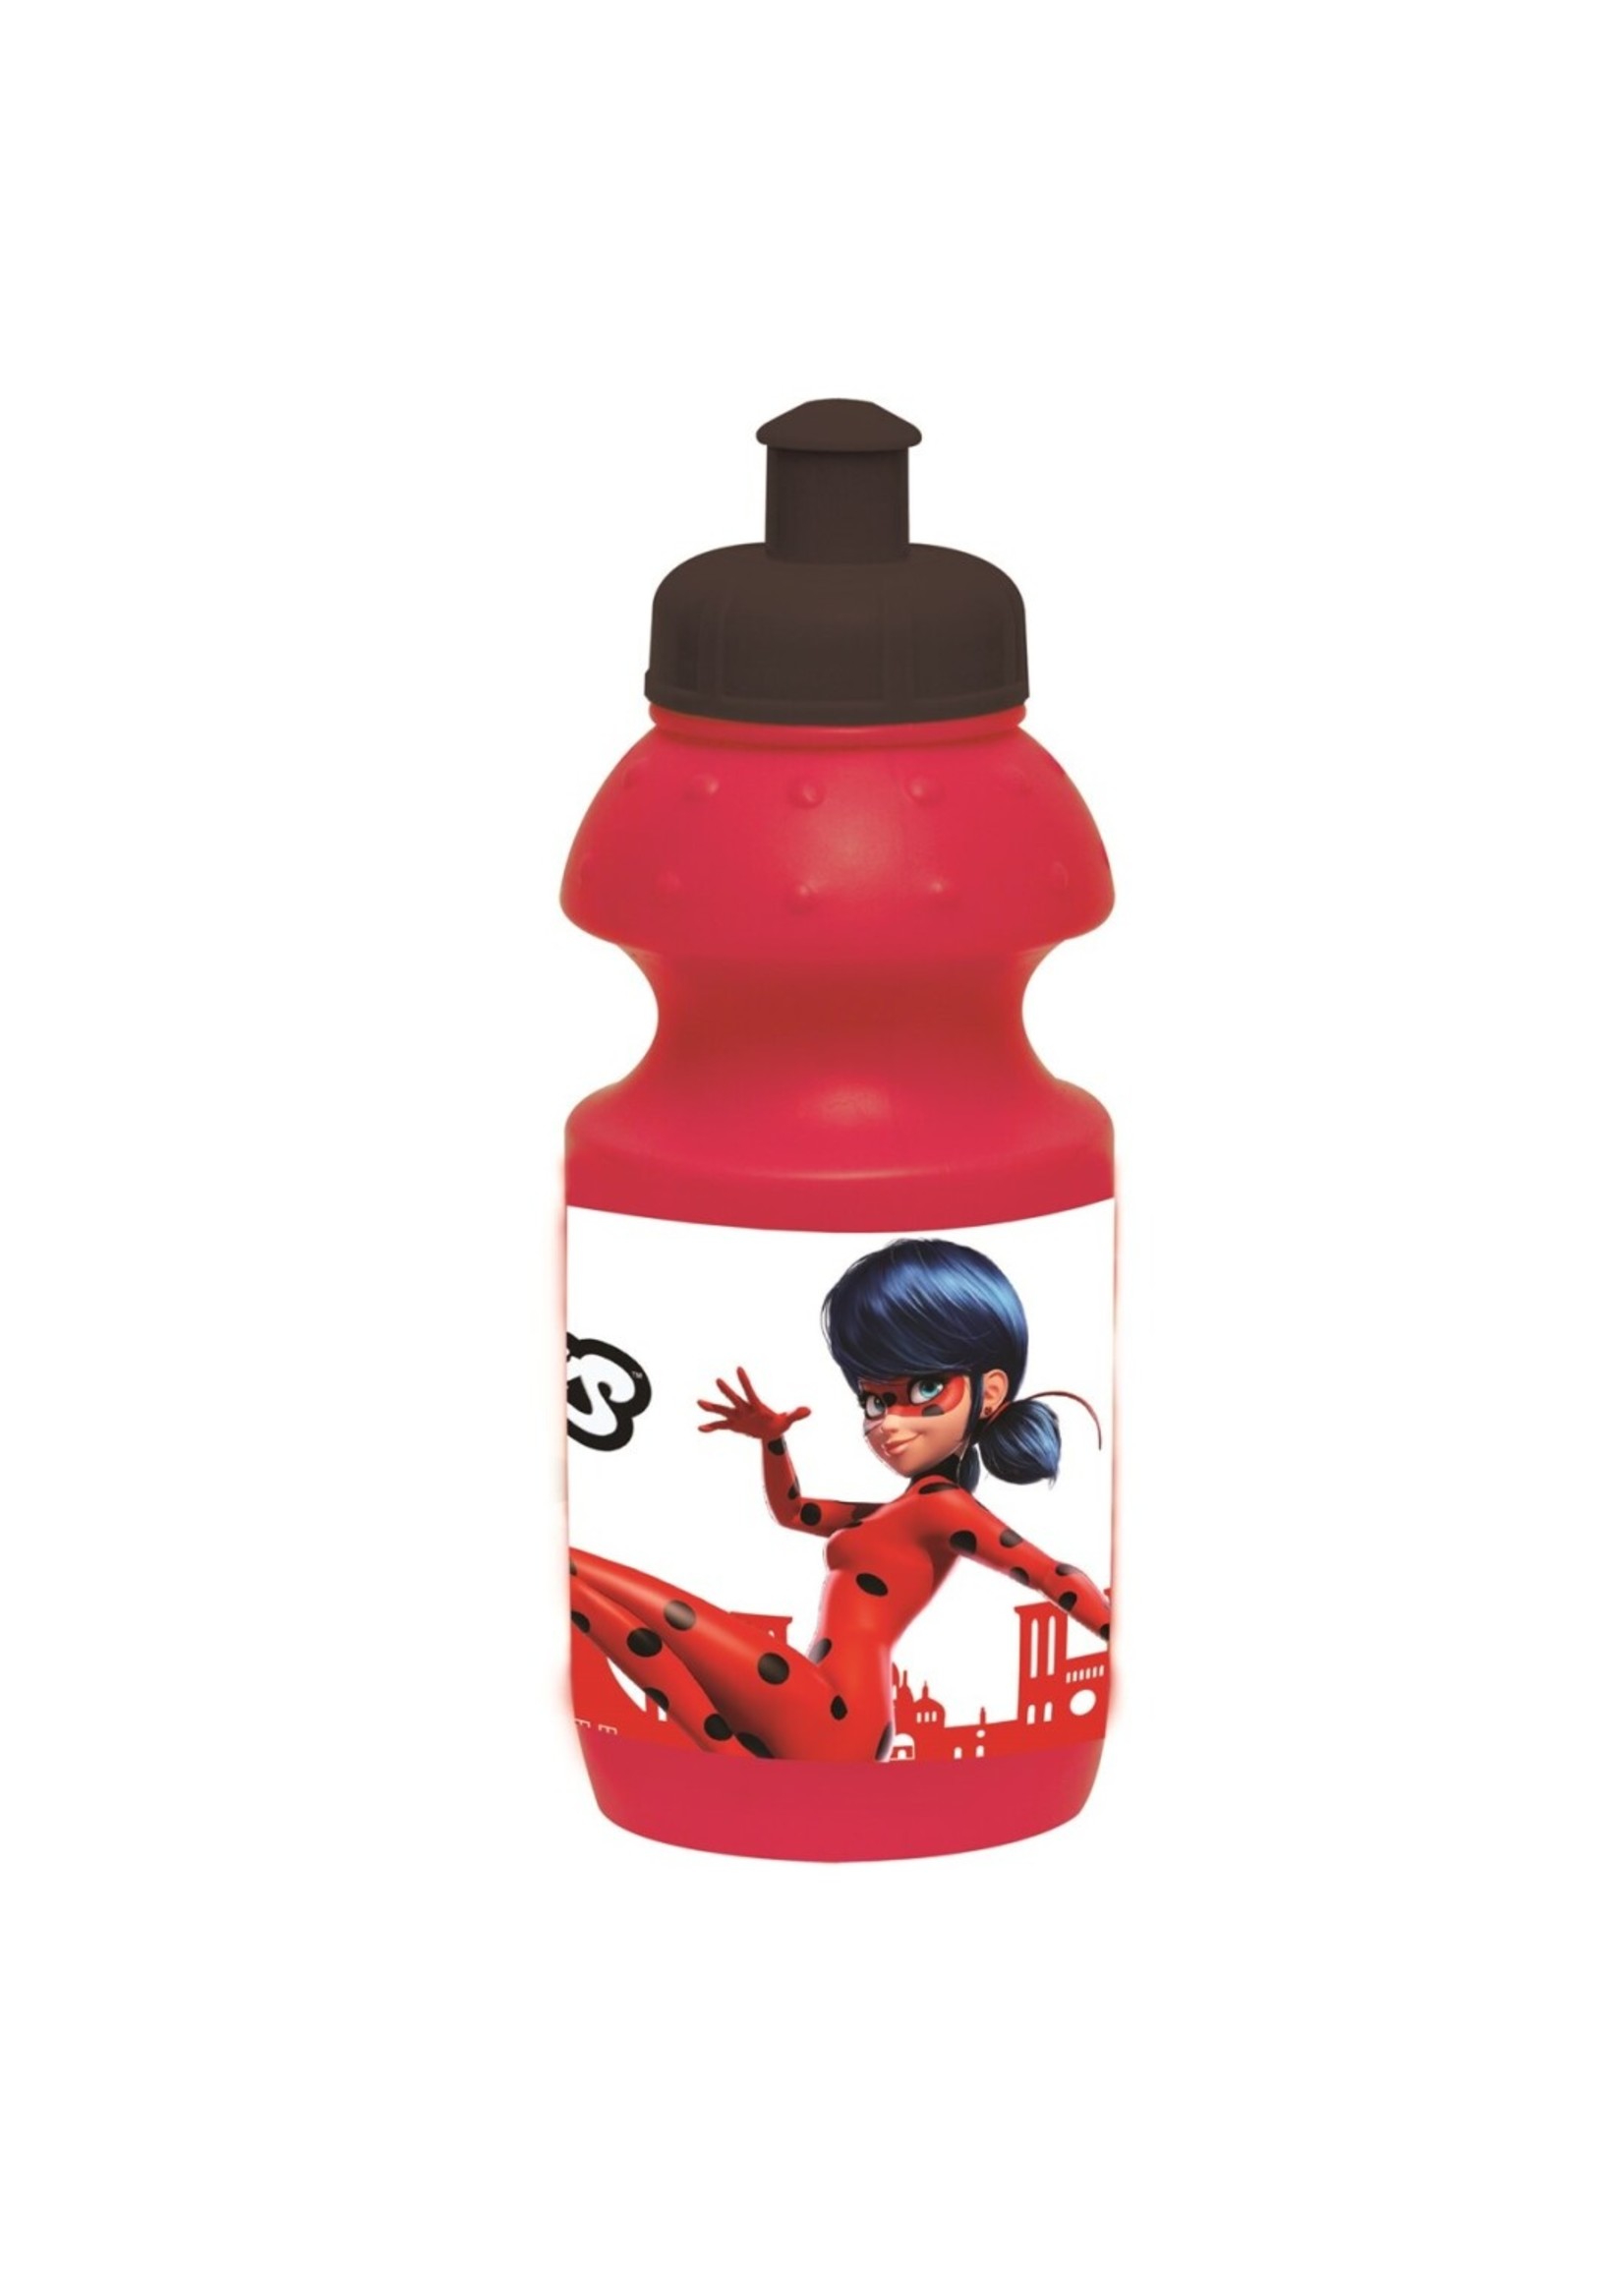 Miraculous Ladybug drinking bottle from Miraculous red